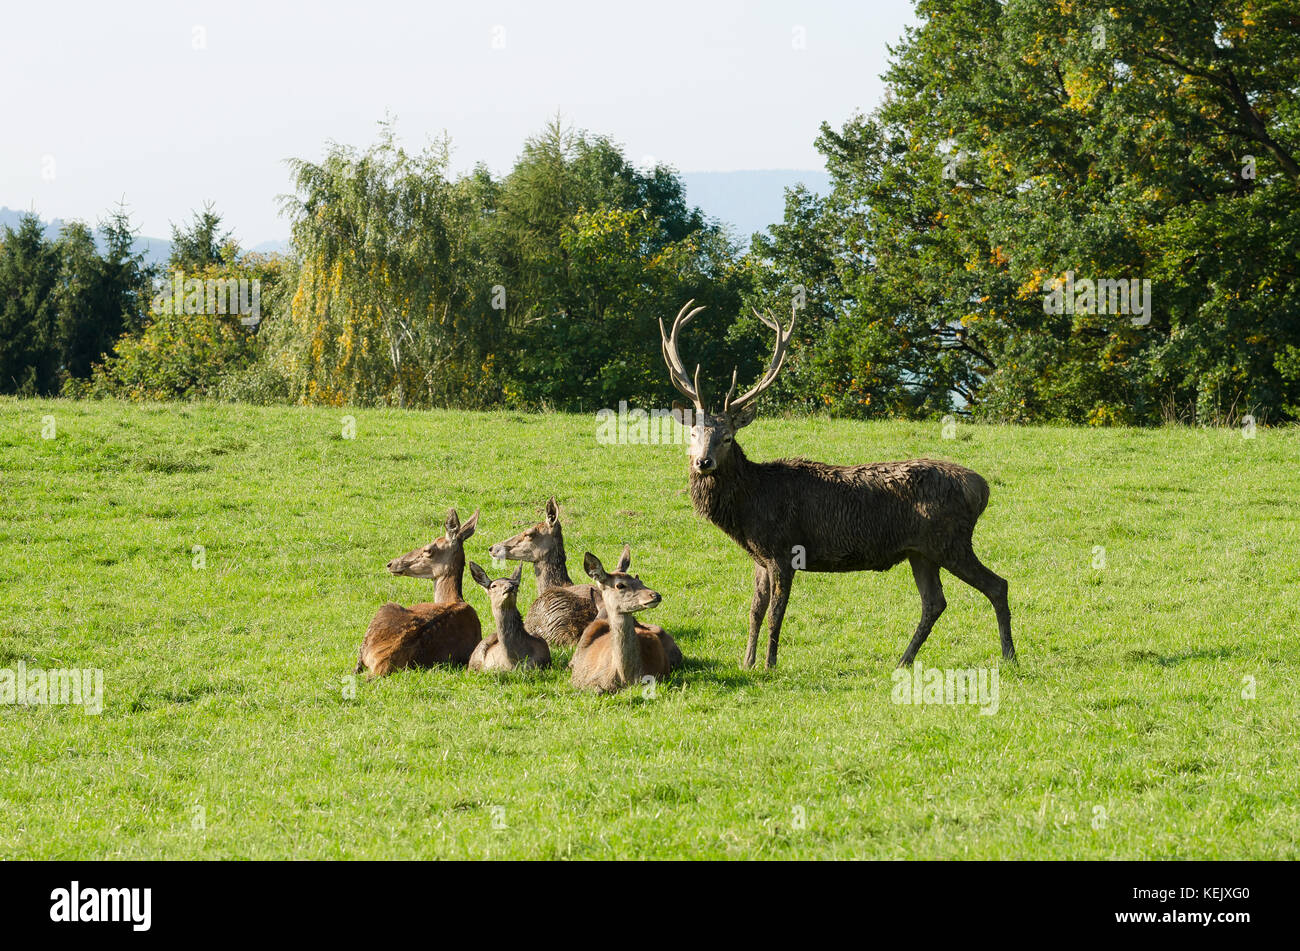 European red deer group on a paddock in the summer sun. Mature stag (male) and four hinds (females). Herd of Cervus elaphus in Western Europe. Photo. Stock Photo